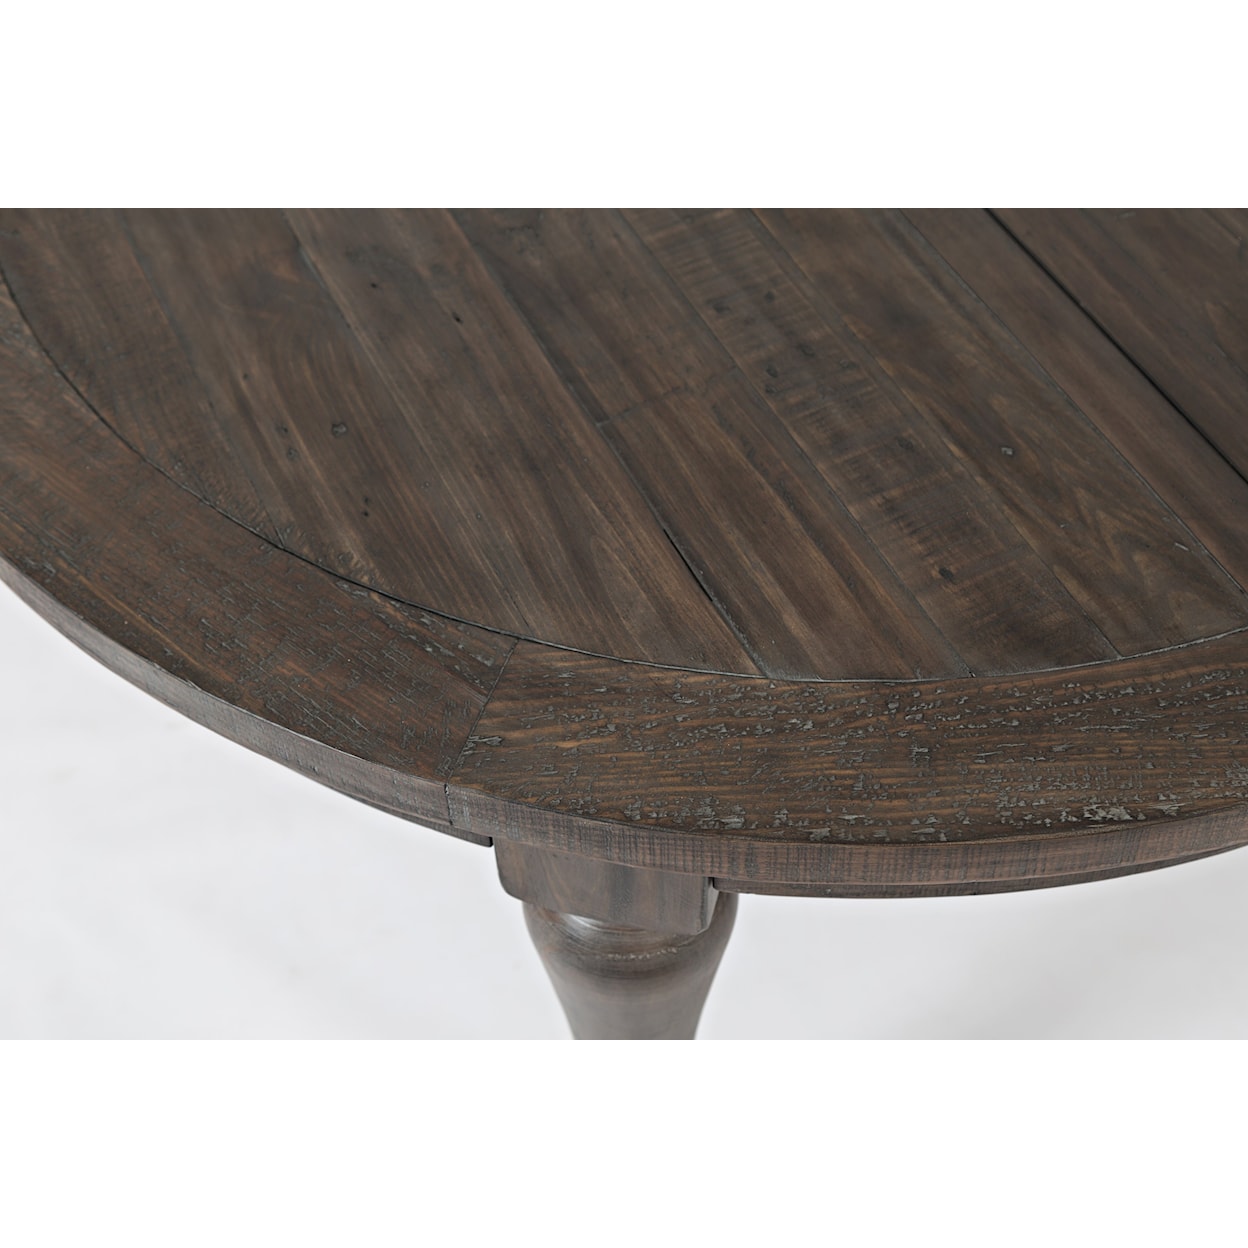 Jofran Madison County Dining Table